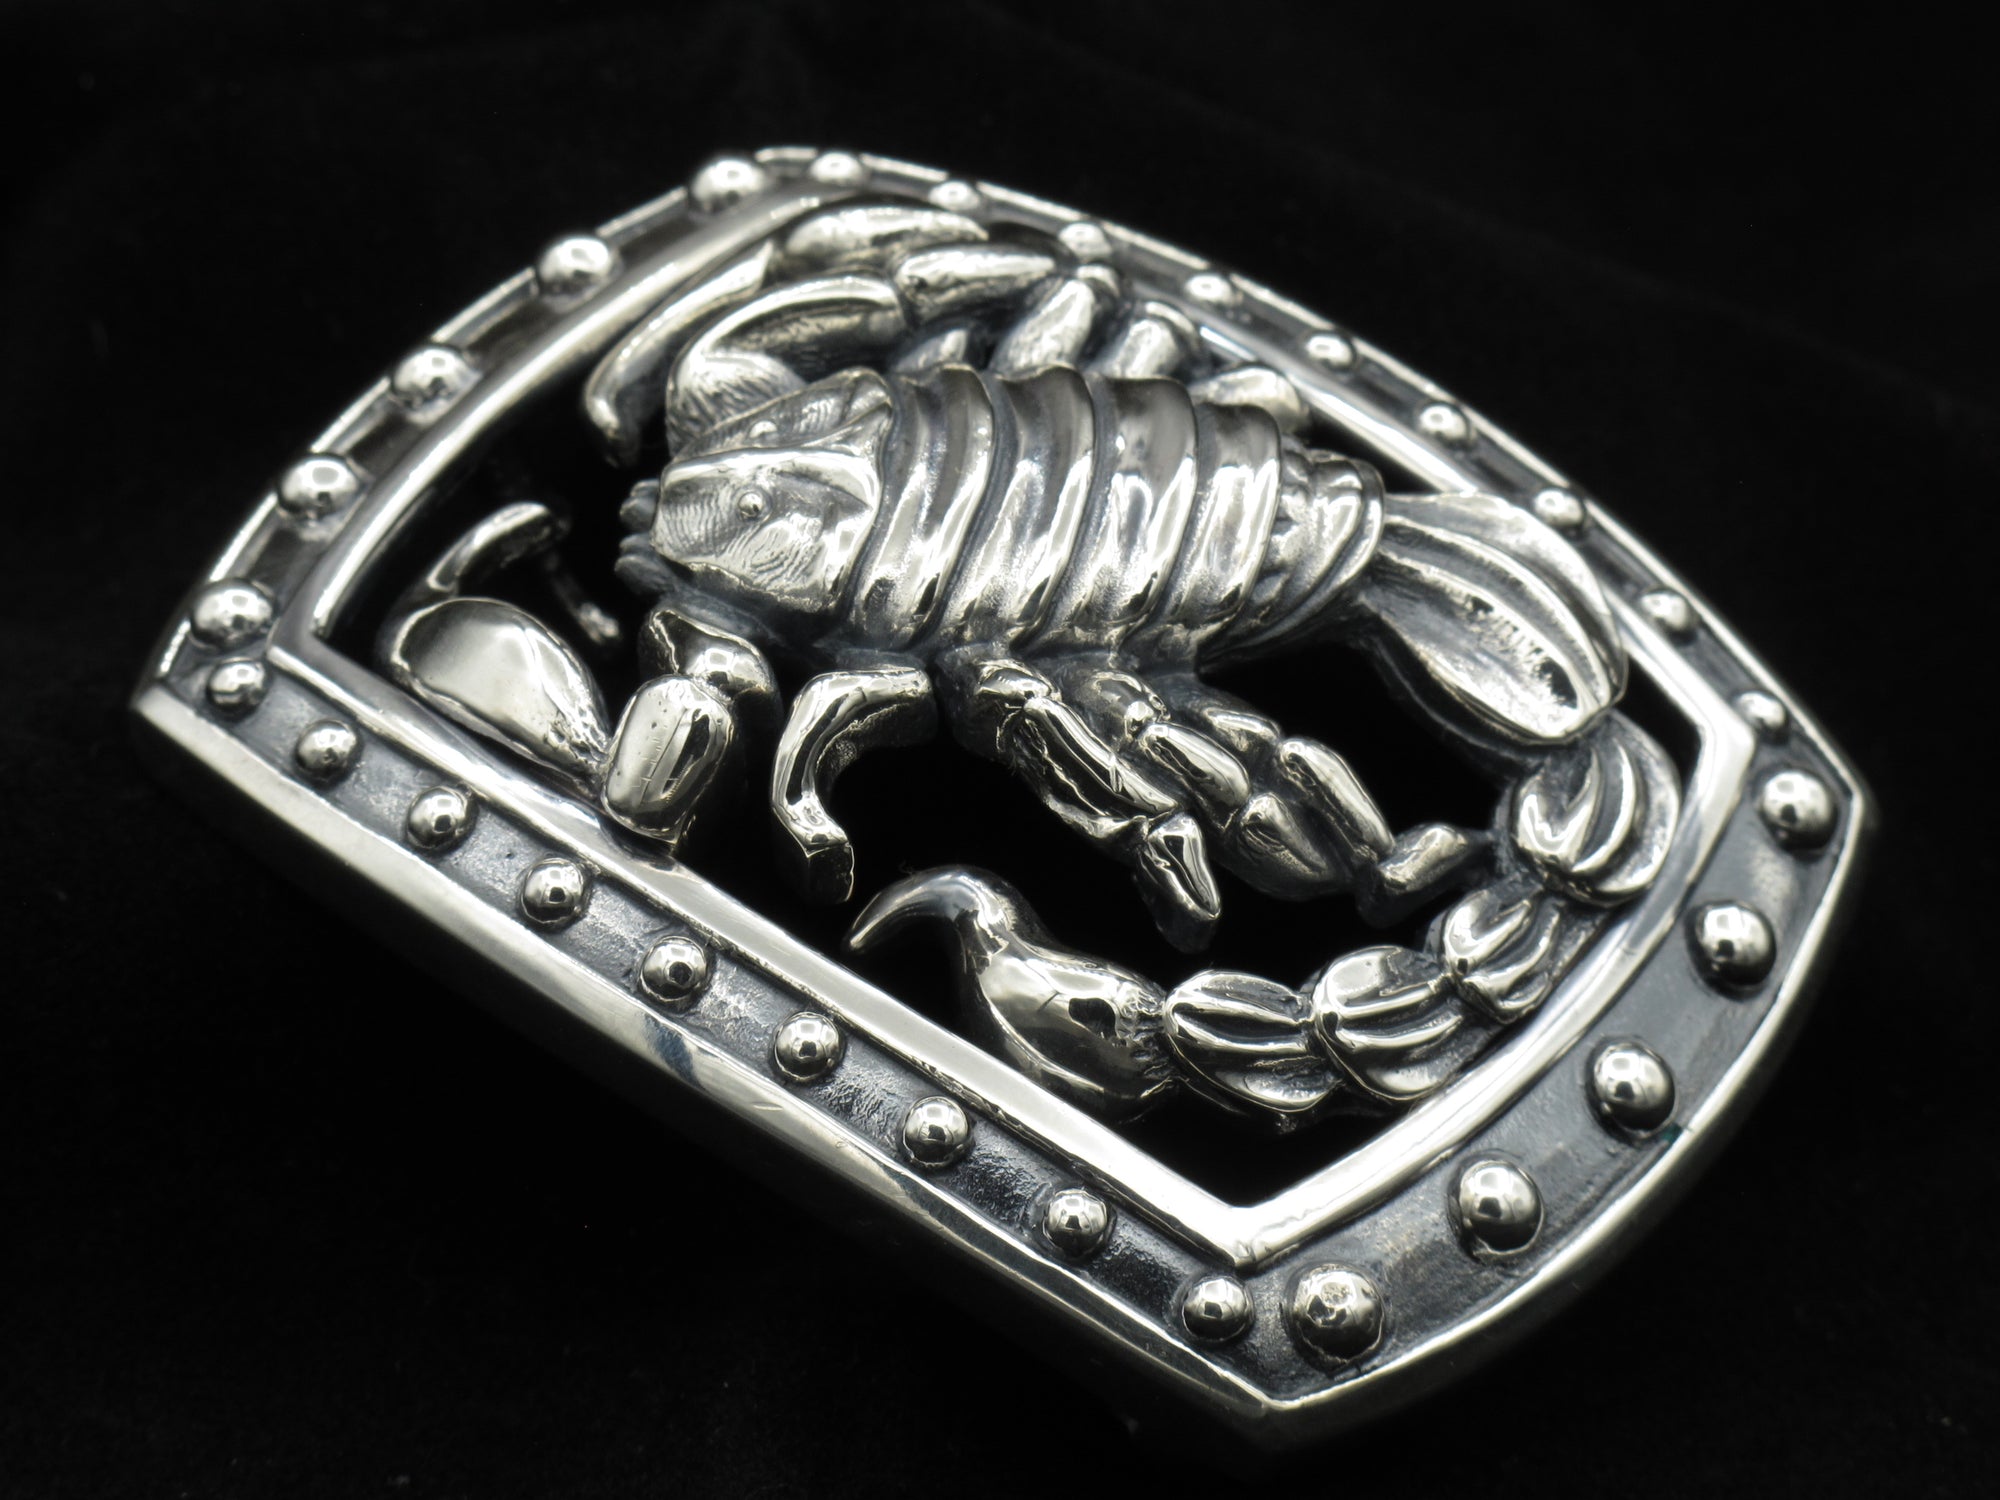 Spotlight on the Scorpion Buckle for 1.5" Straps